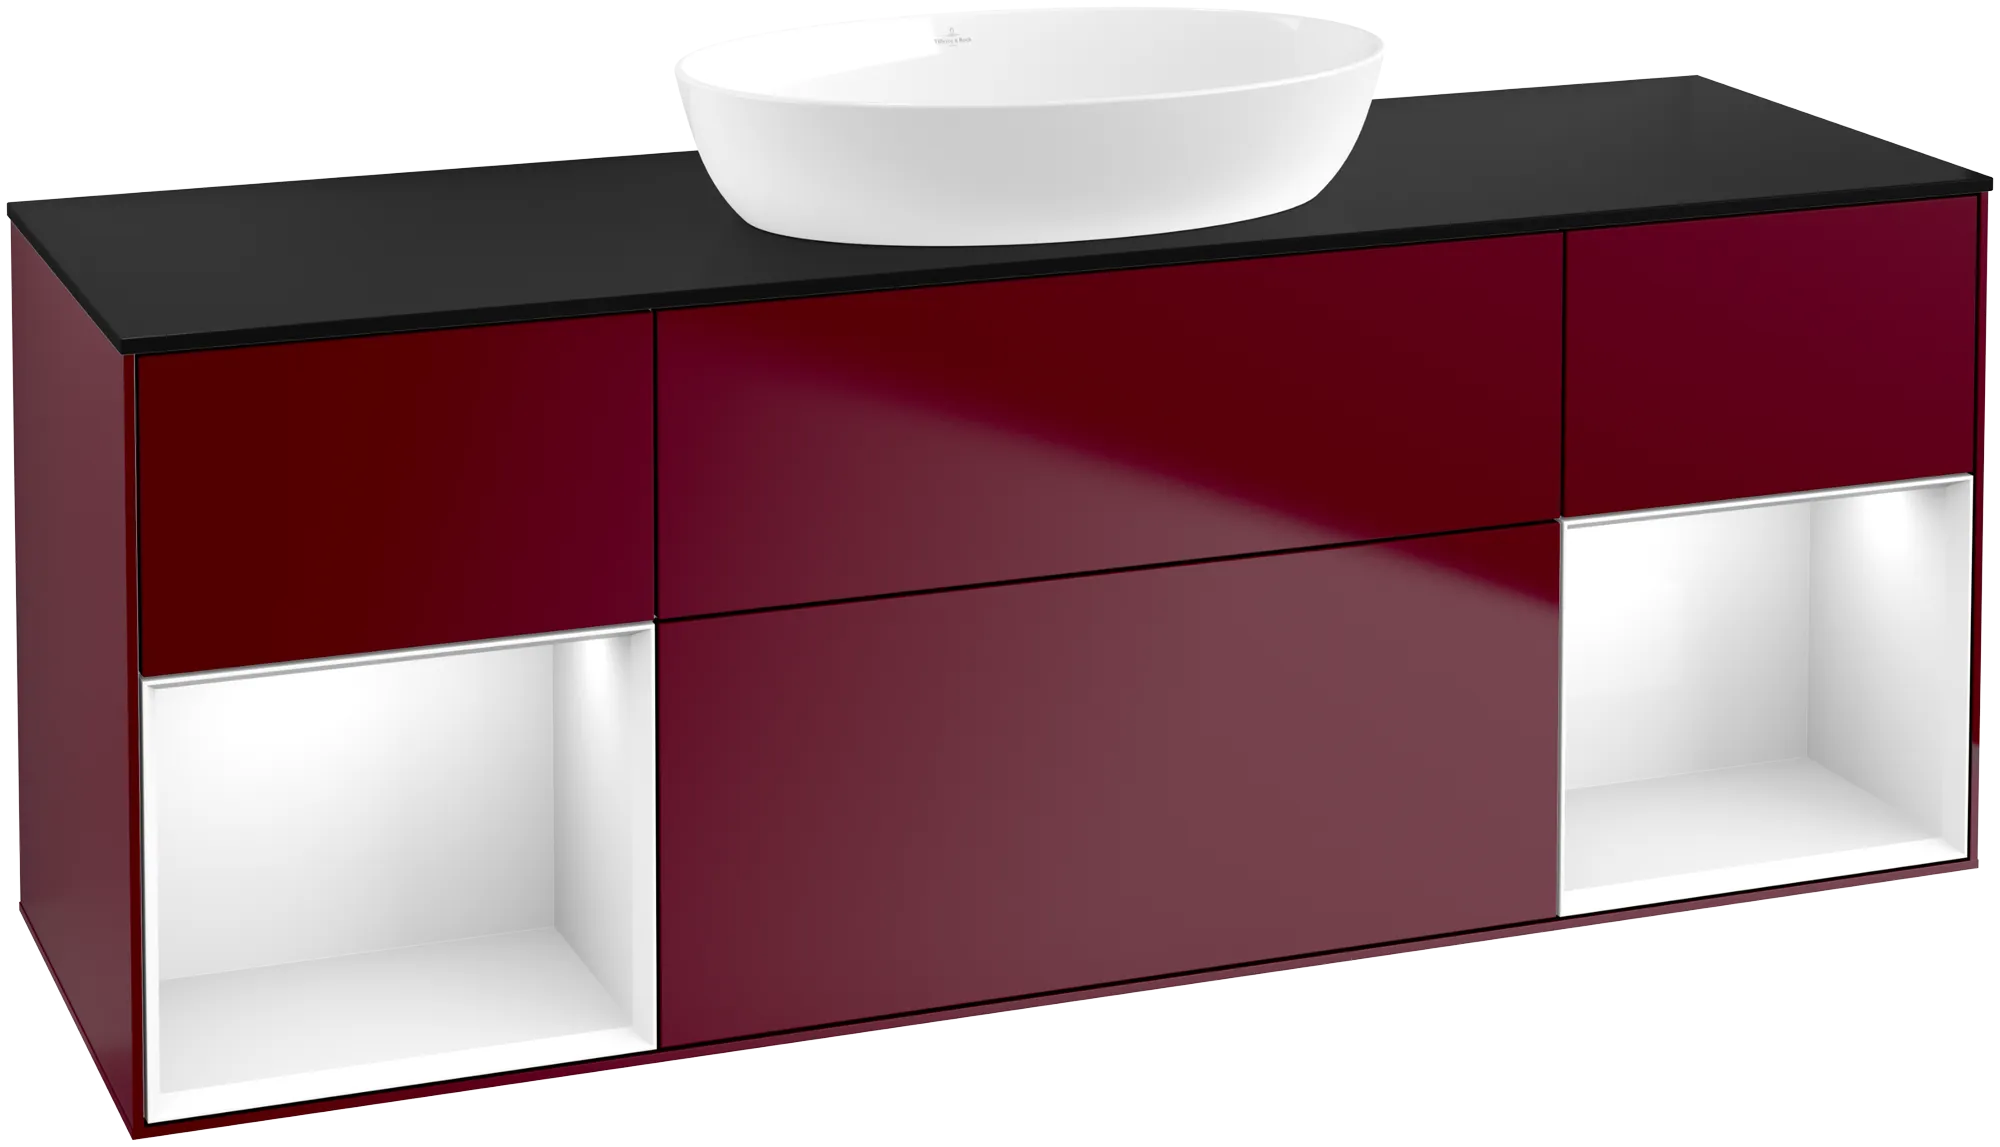 Picture of VILLEROY BOCH Finion Vanity unit, with lighting, 4 pull-out compartments, 1600 x 603 x 501 mm, Peony Matt Lacquer / Glossy White Lacquer / Glass Black Matt #GD02GFHB